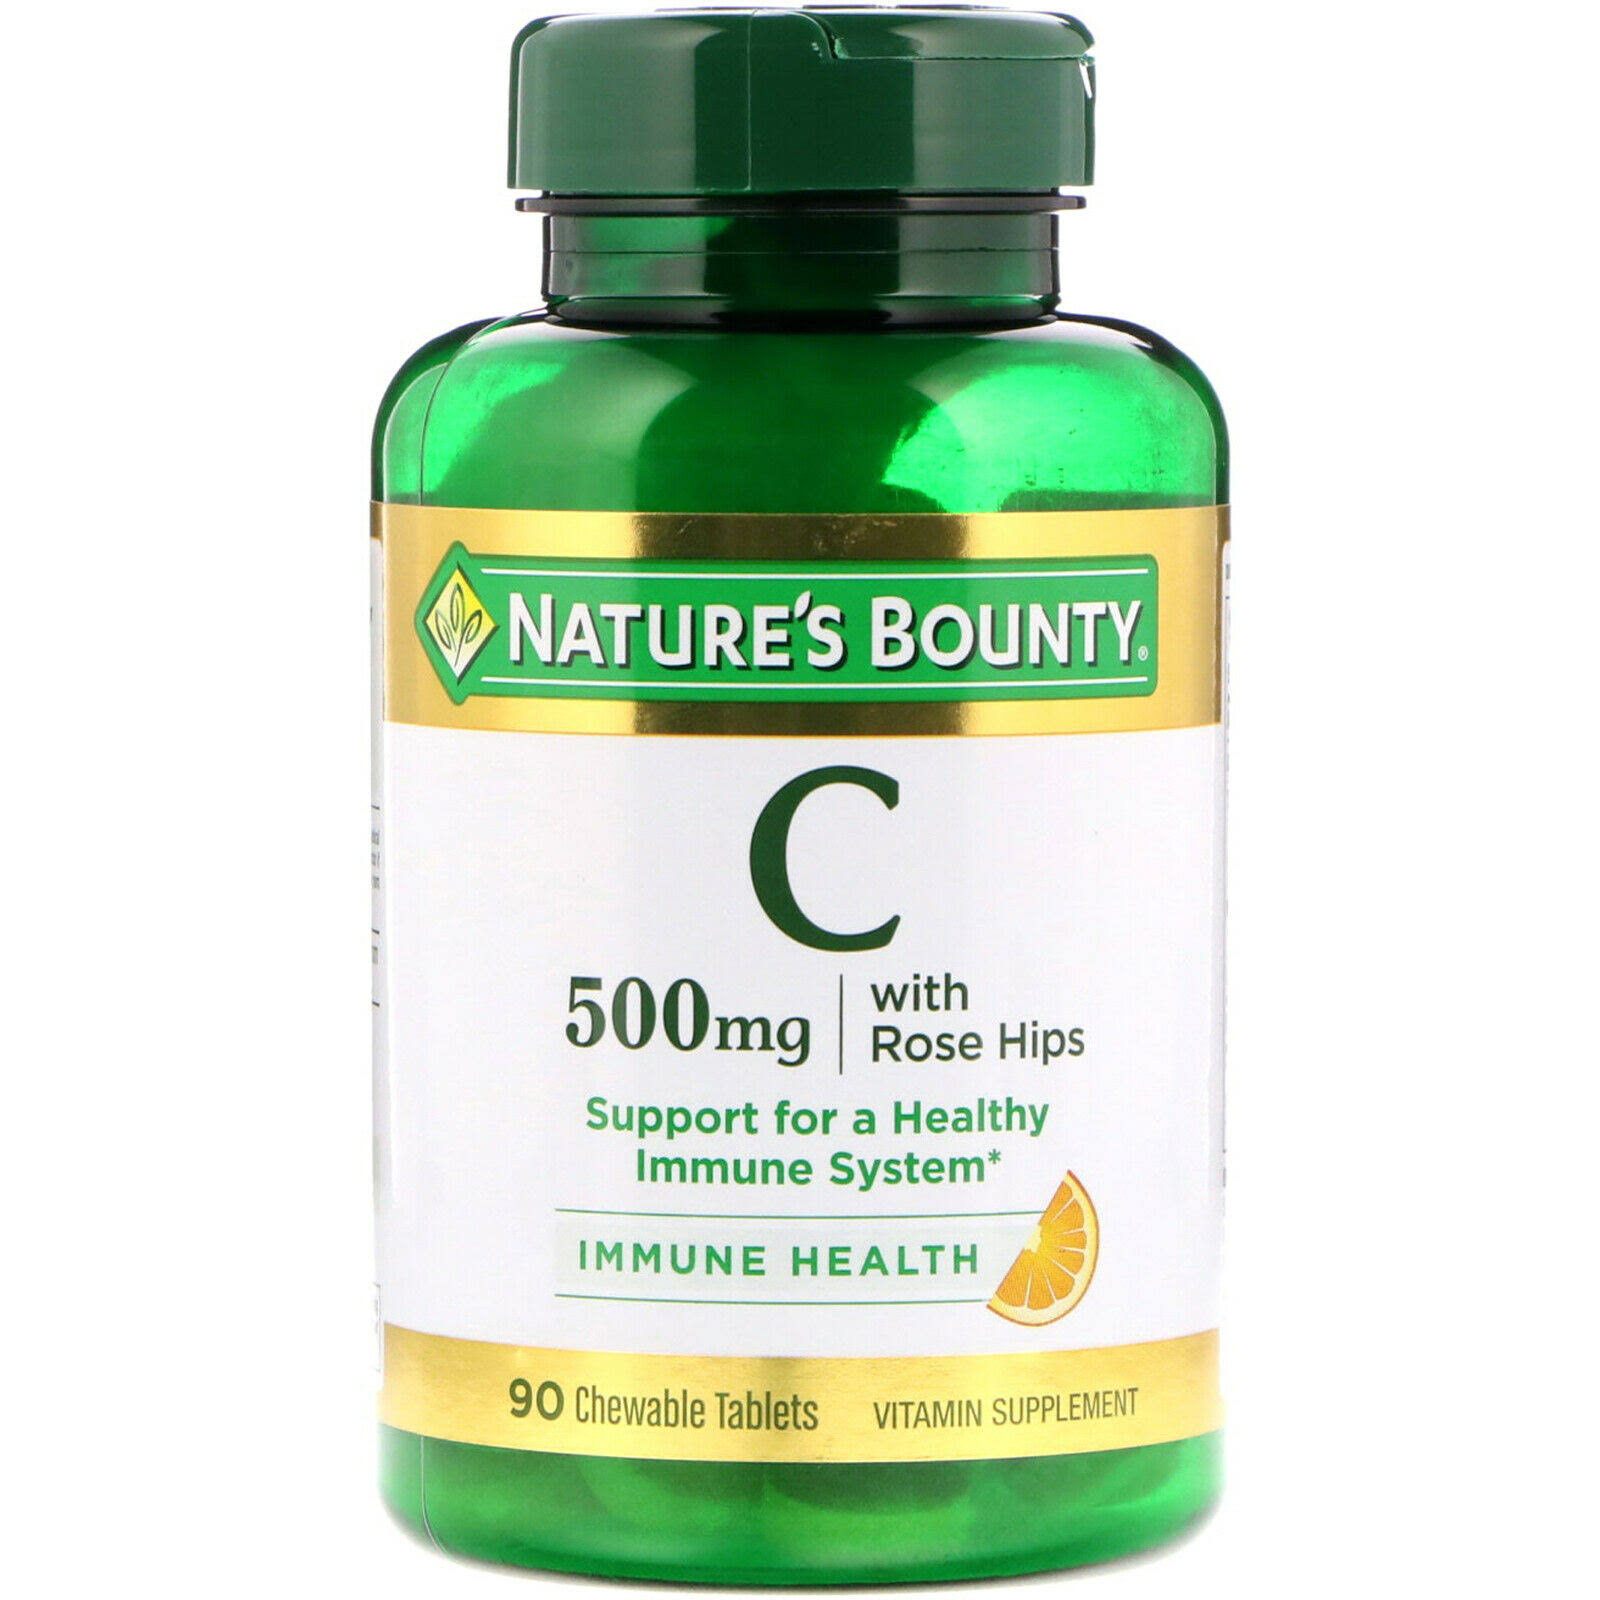 Nature's Bounty Vitamin C-500 With Rose Hips - 90 Tablets